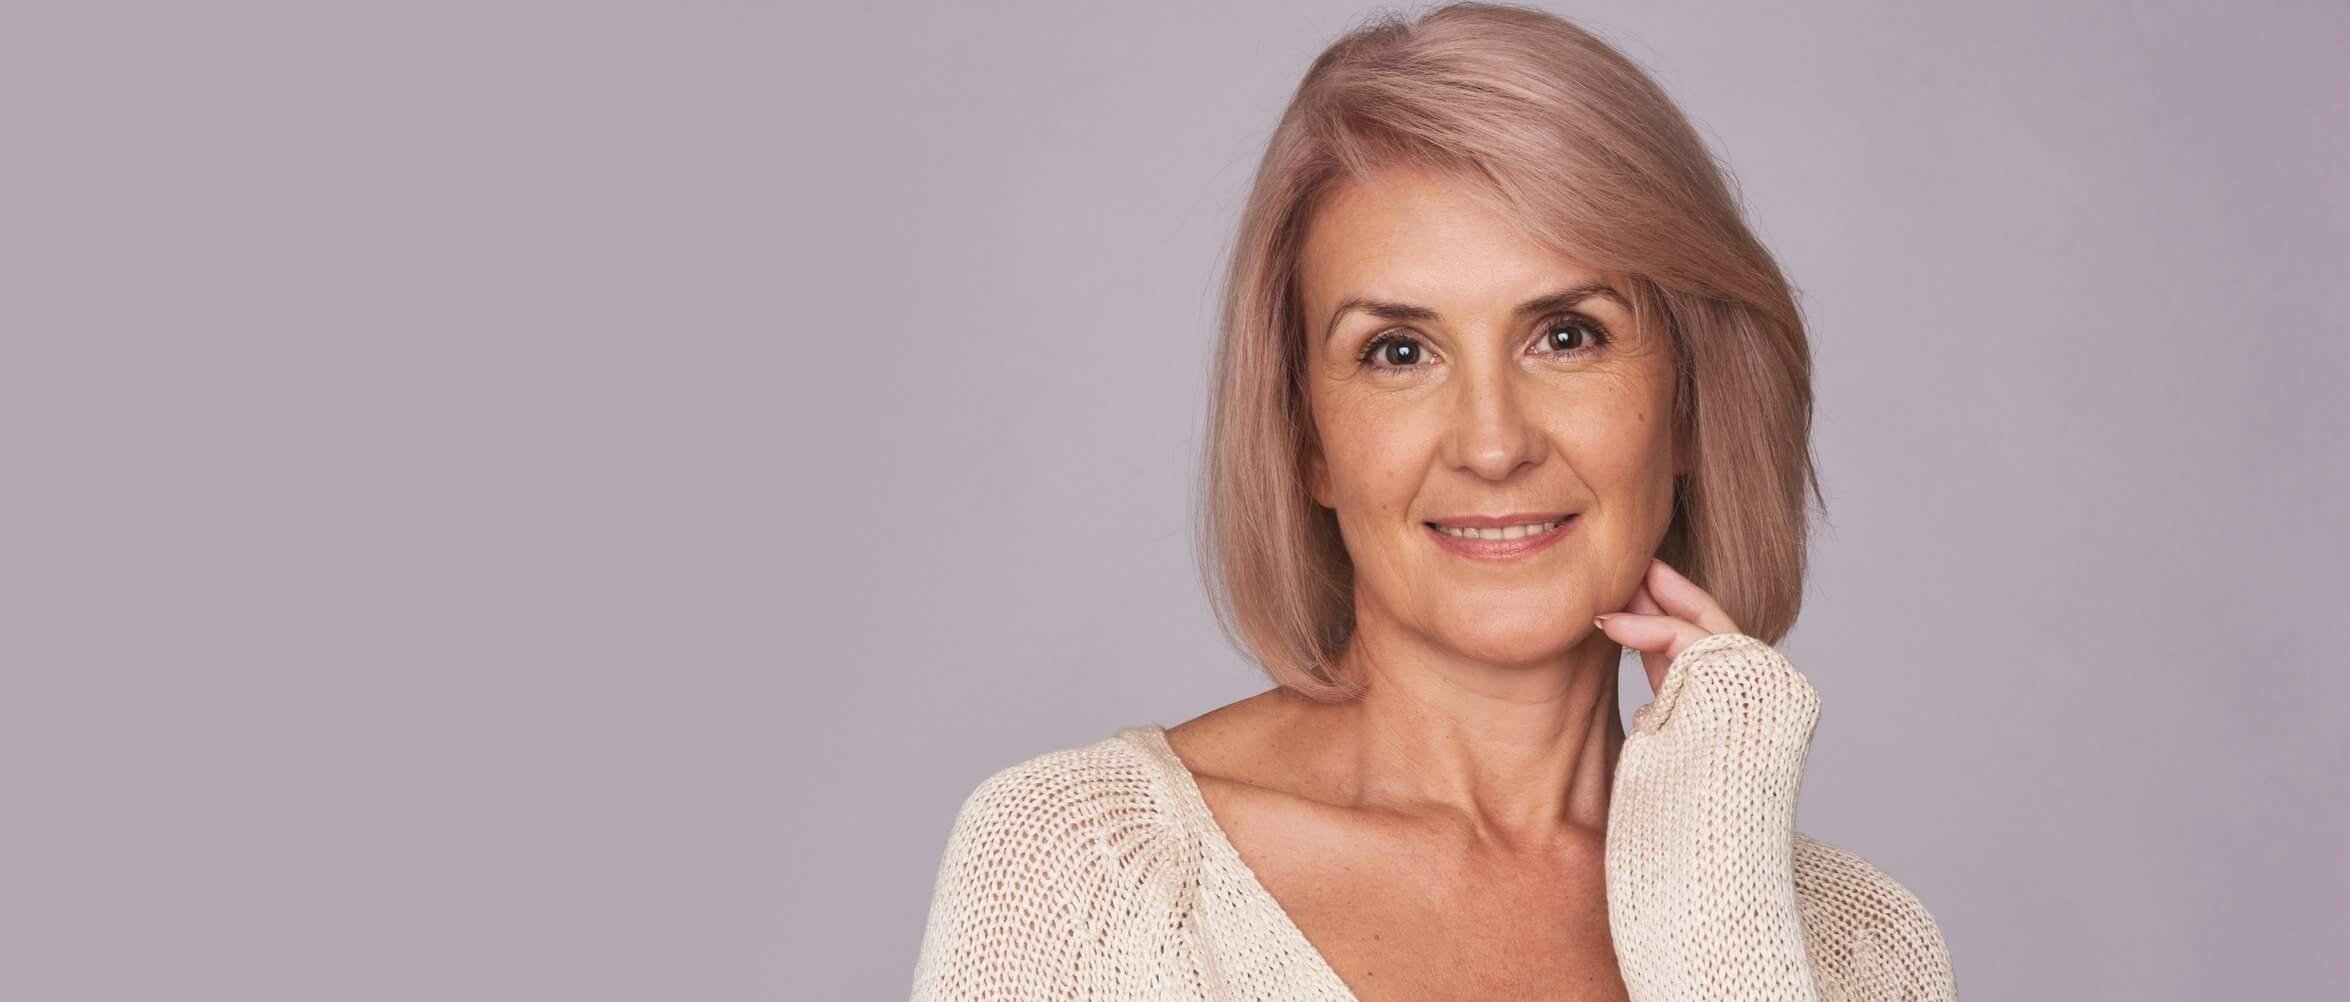 Non-Surgical Facelifts | Look Lovely London